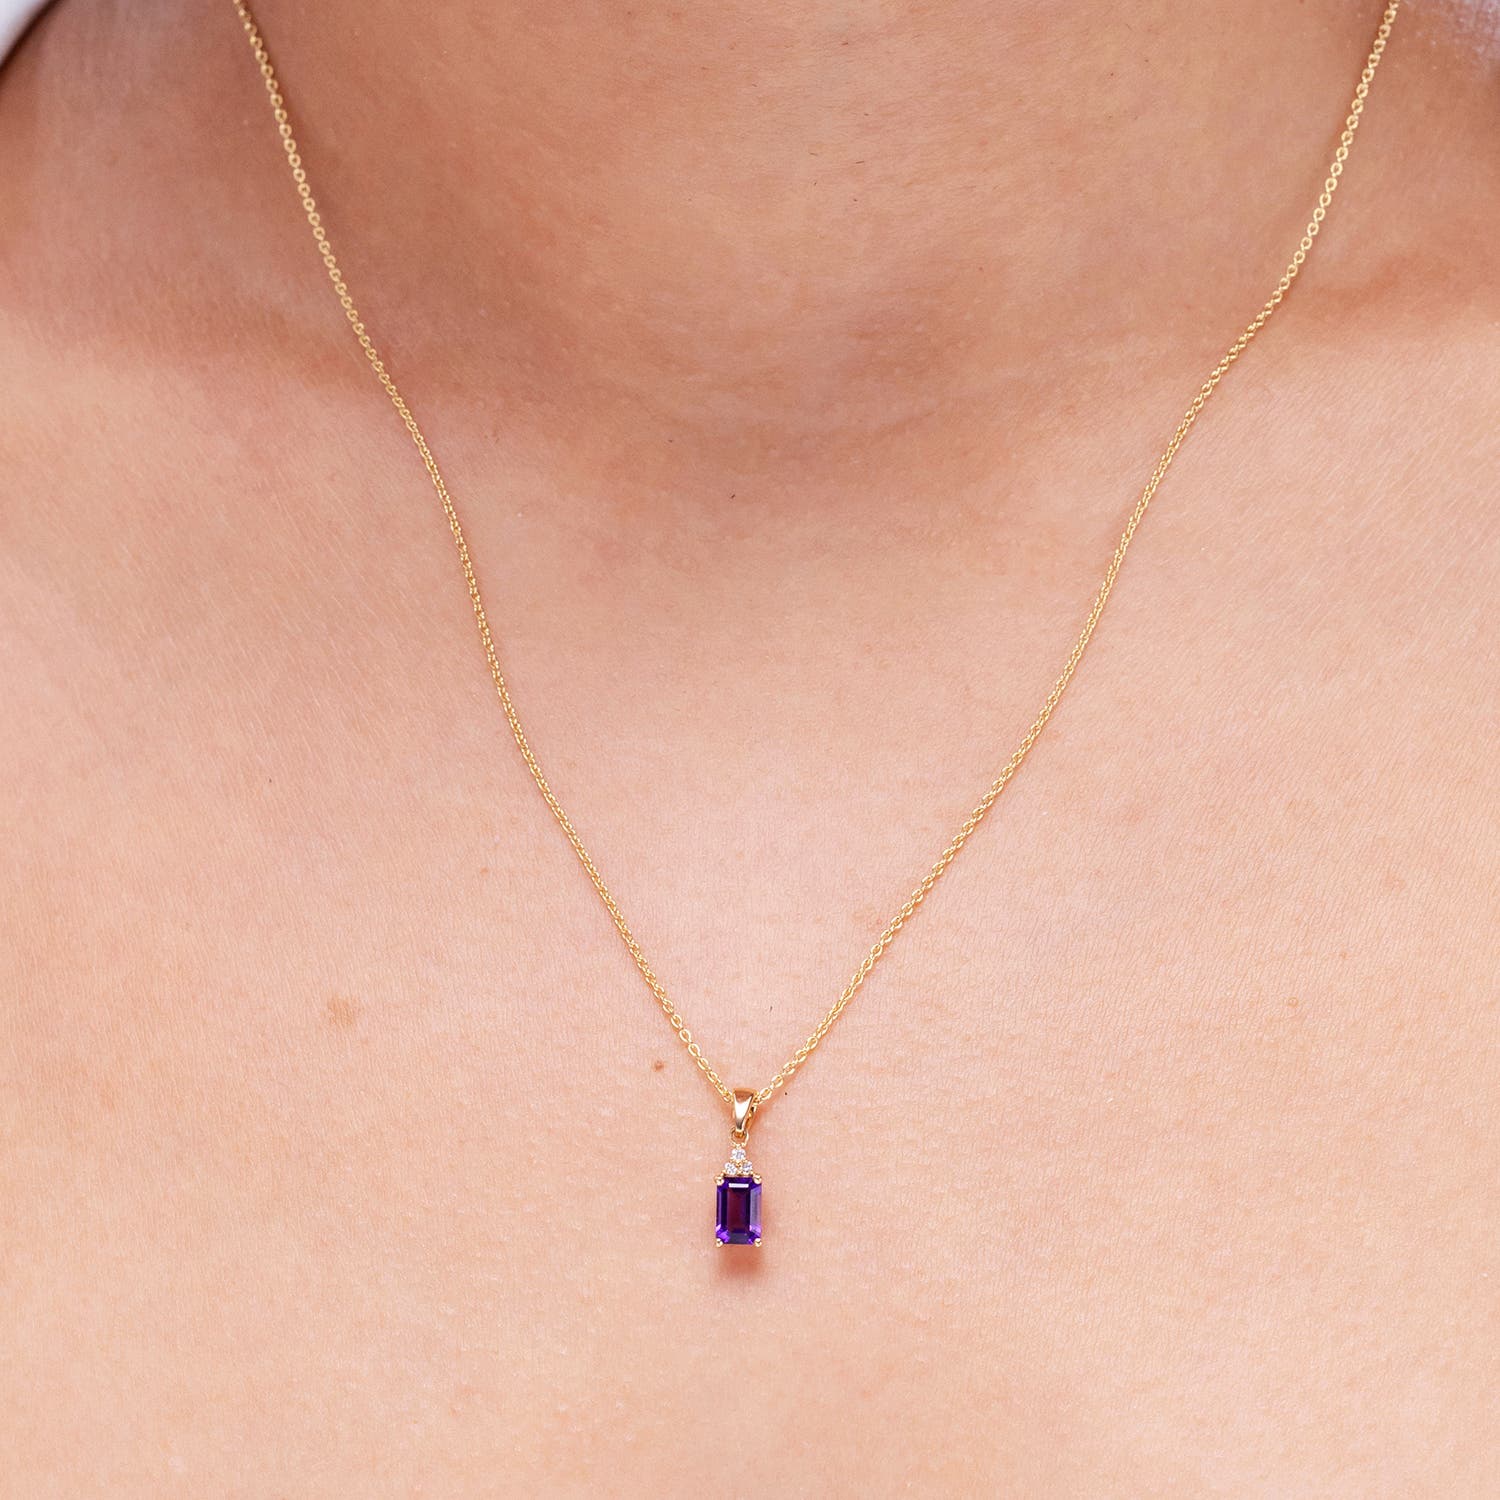 A - Amethyst / 0.57 CT / 14 KT Yellow Gold